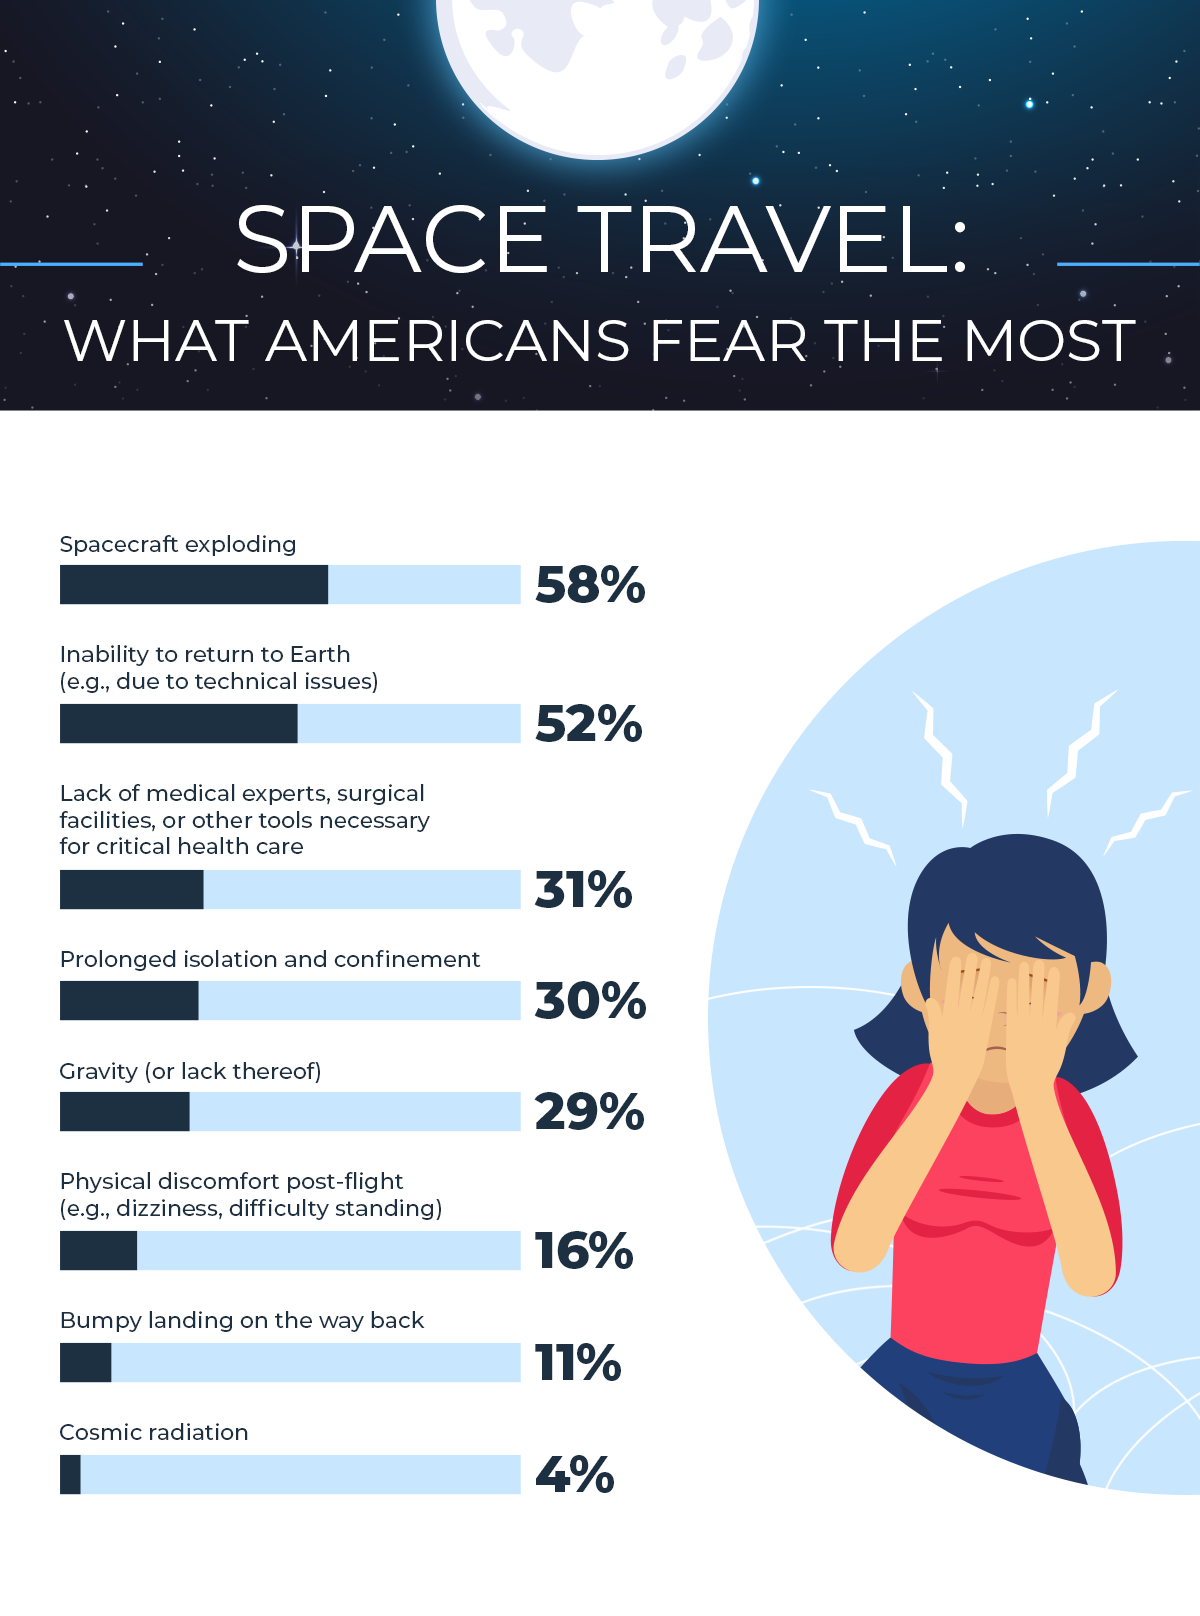 Space Travel: what Americans fear the most